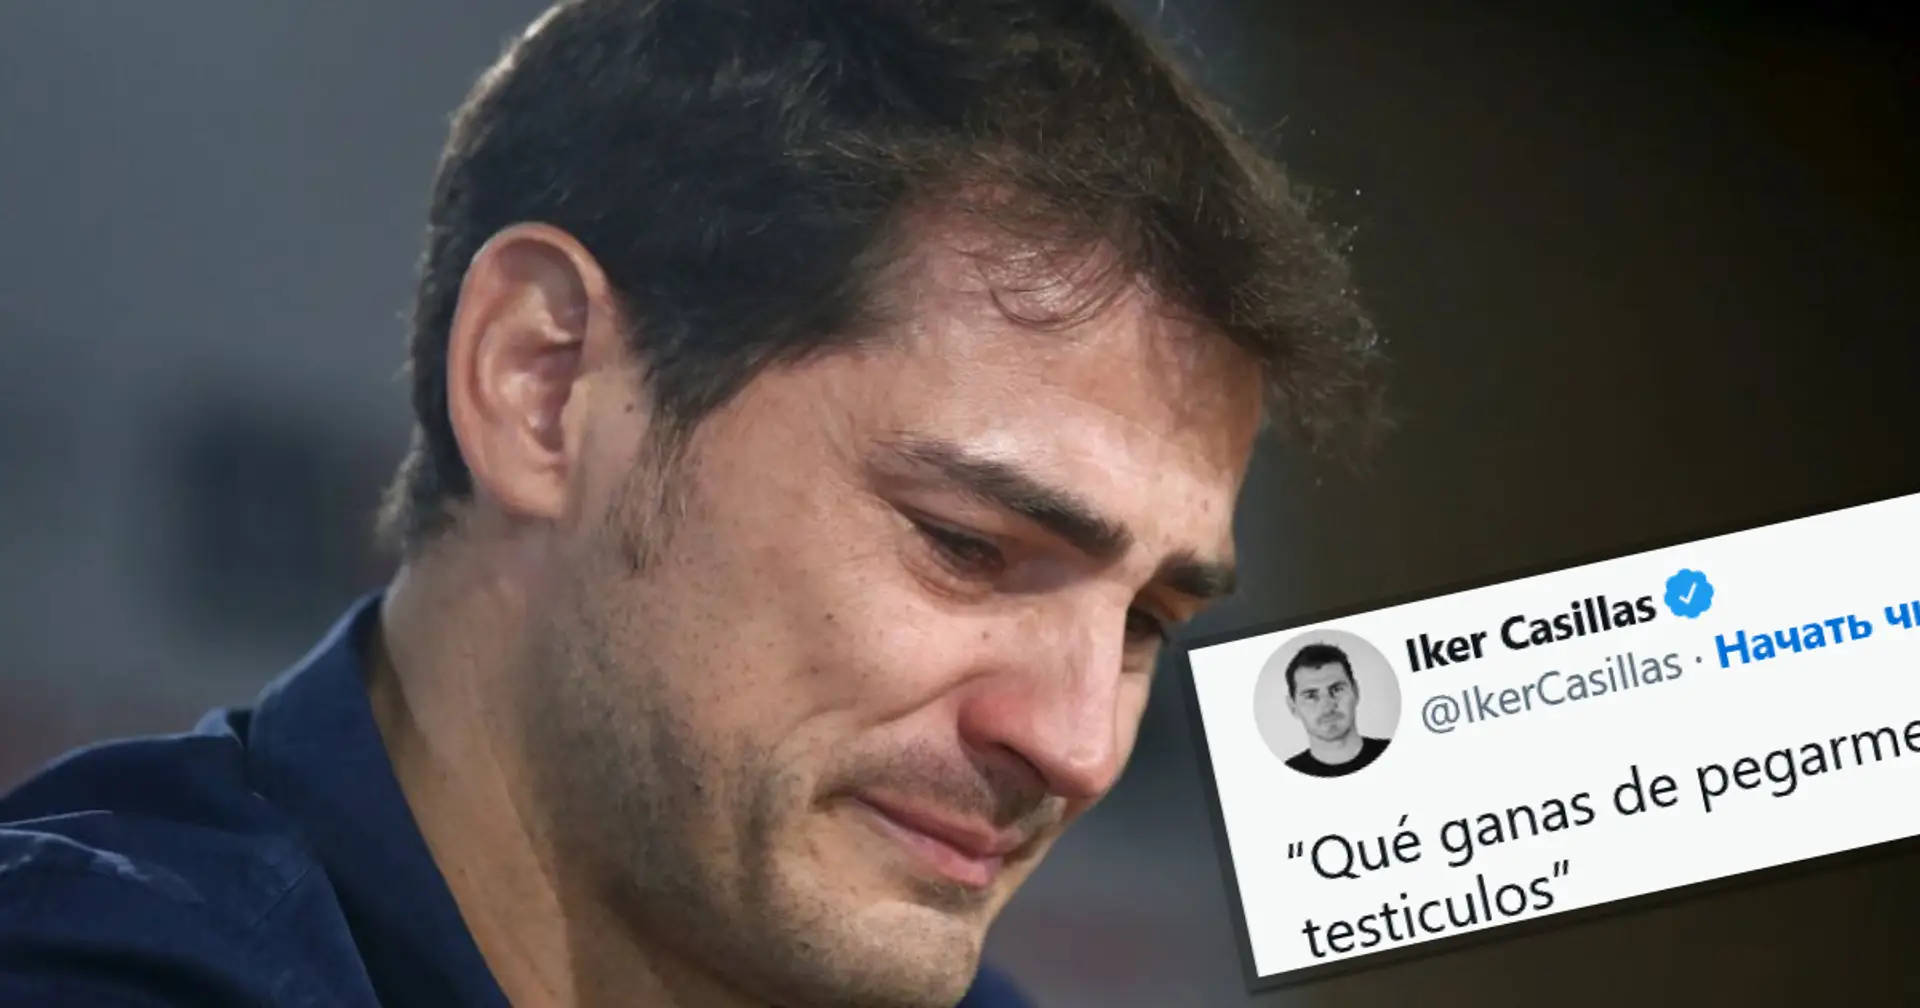 Iker Casillas on Twitter: 'I can't wait to shoot myself 7 times in the balls'